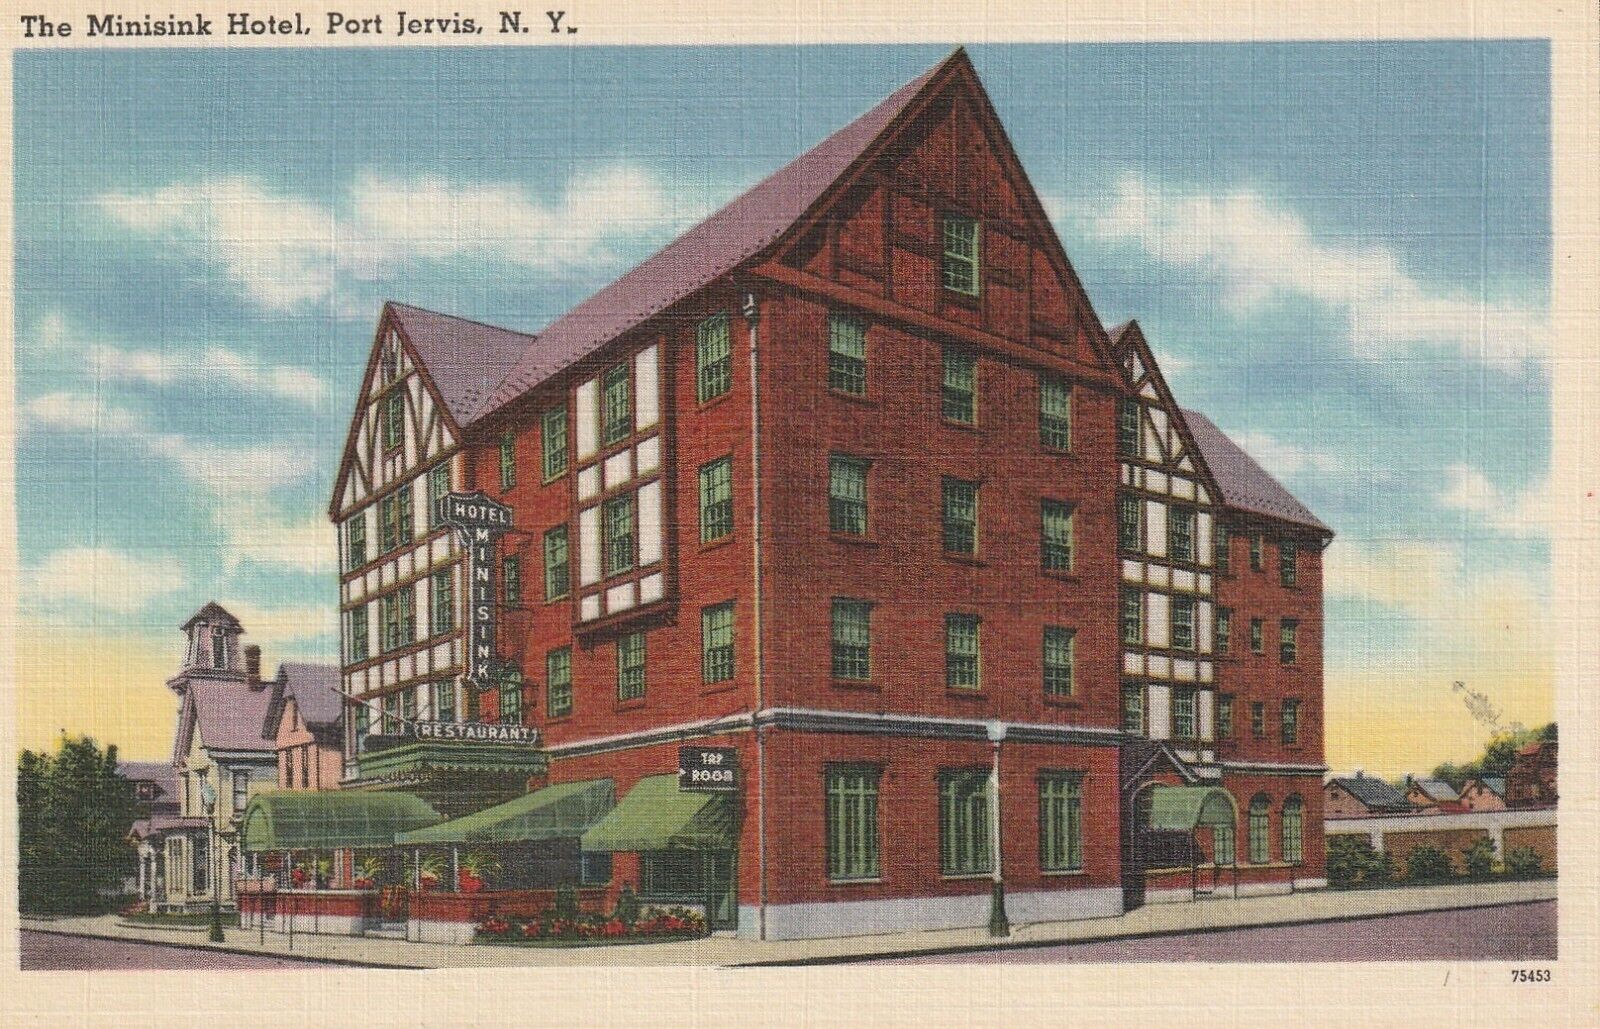 C1950s The Minisink Hotel, Port Jervis, N.Y. Tap Room, Restaurant, a841